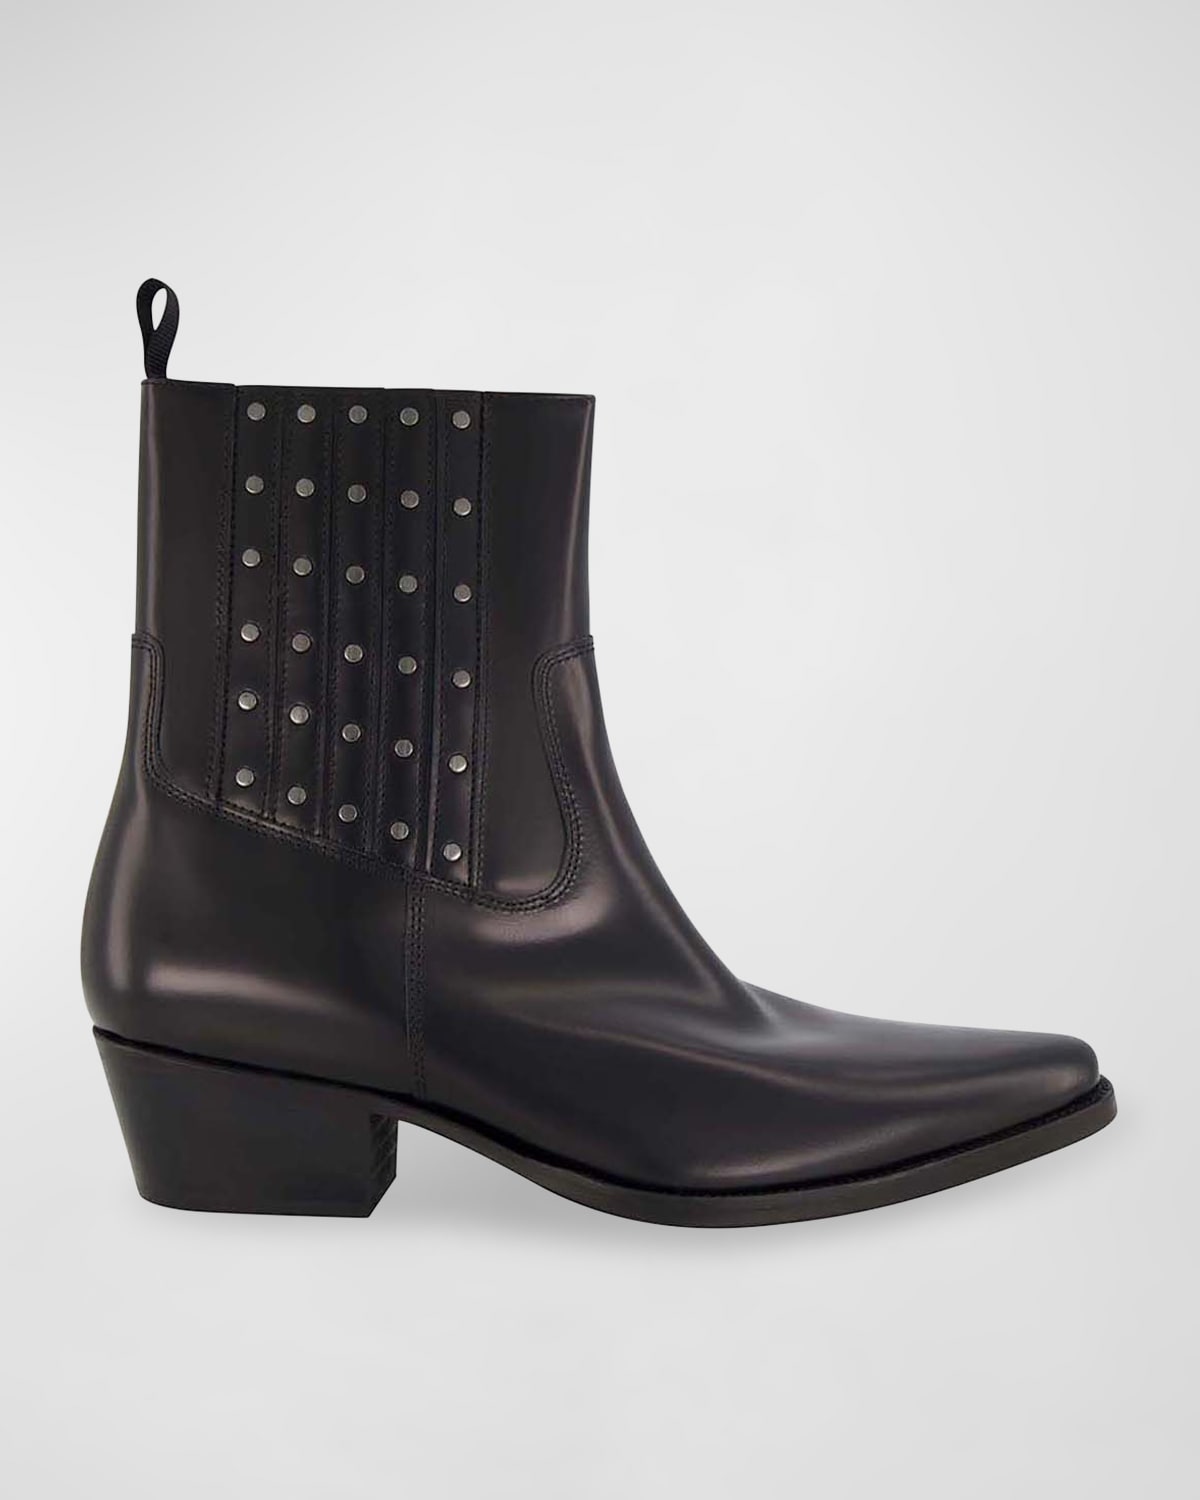 Men's Studded Leather Chelsea Boots